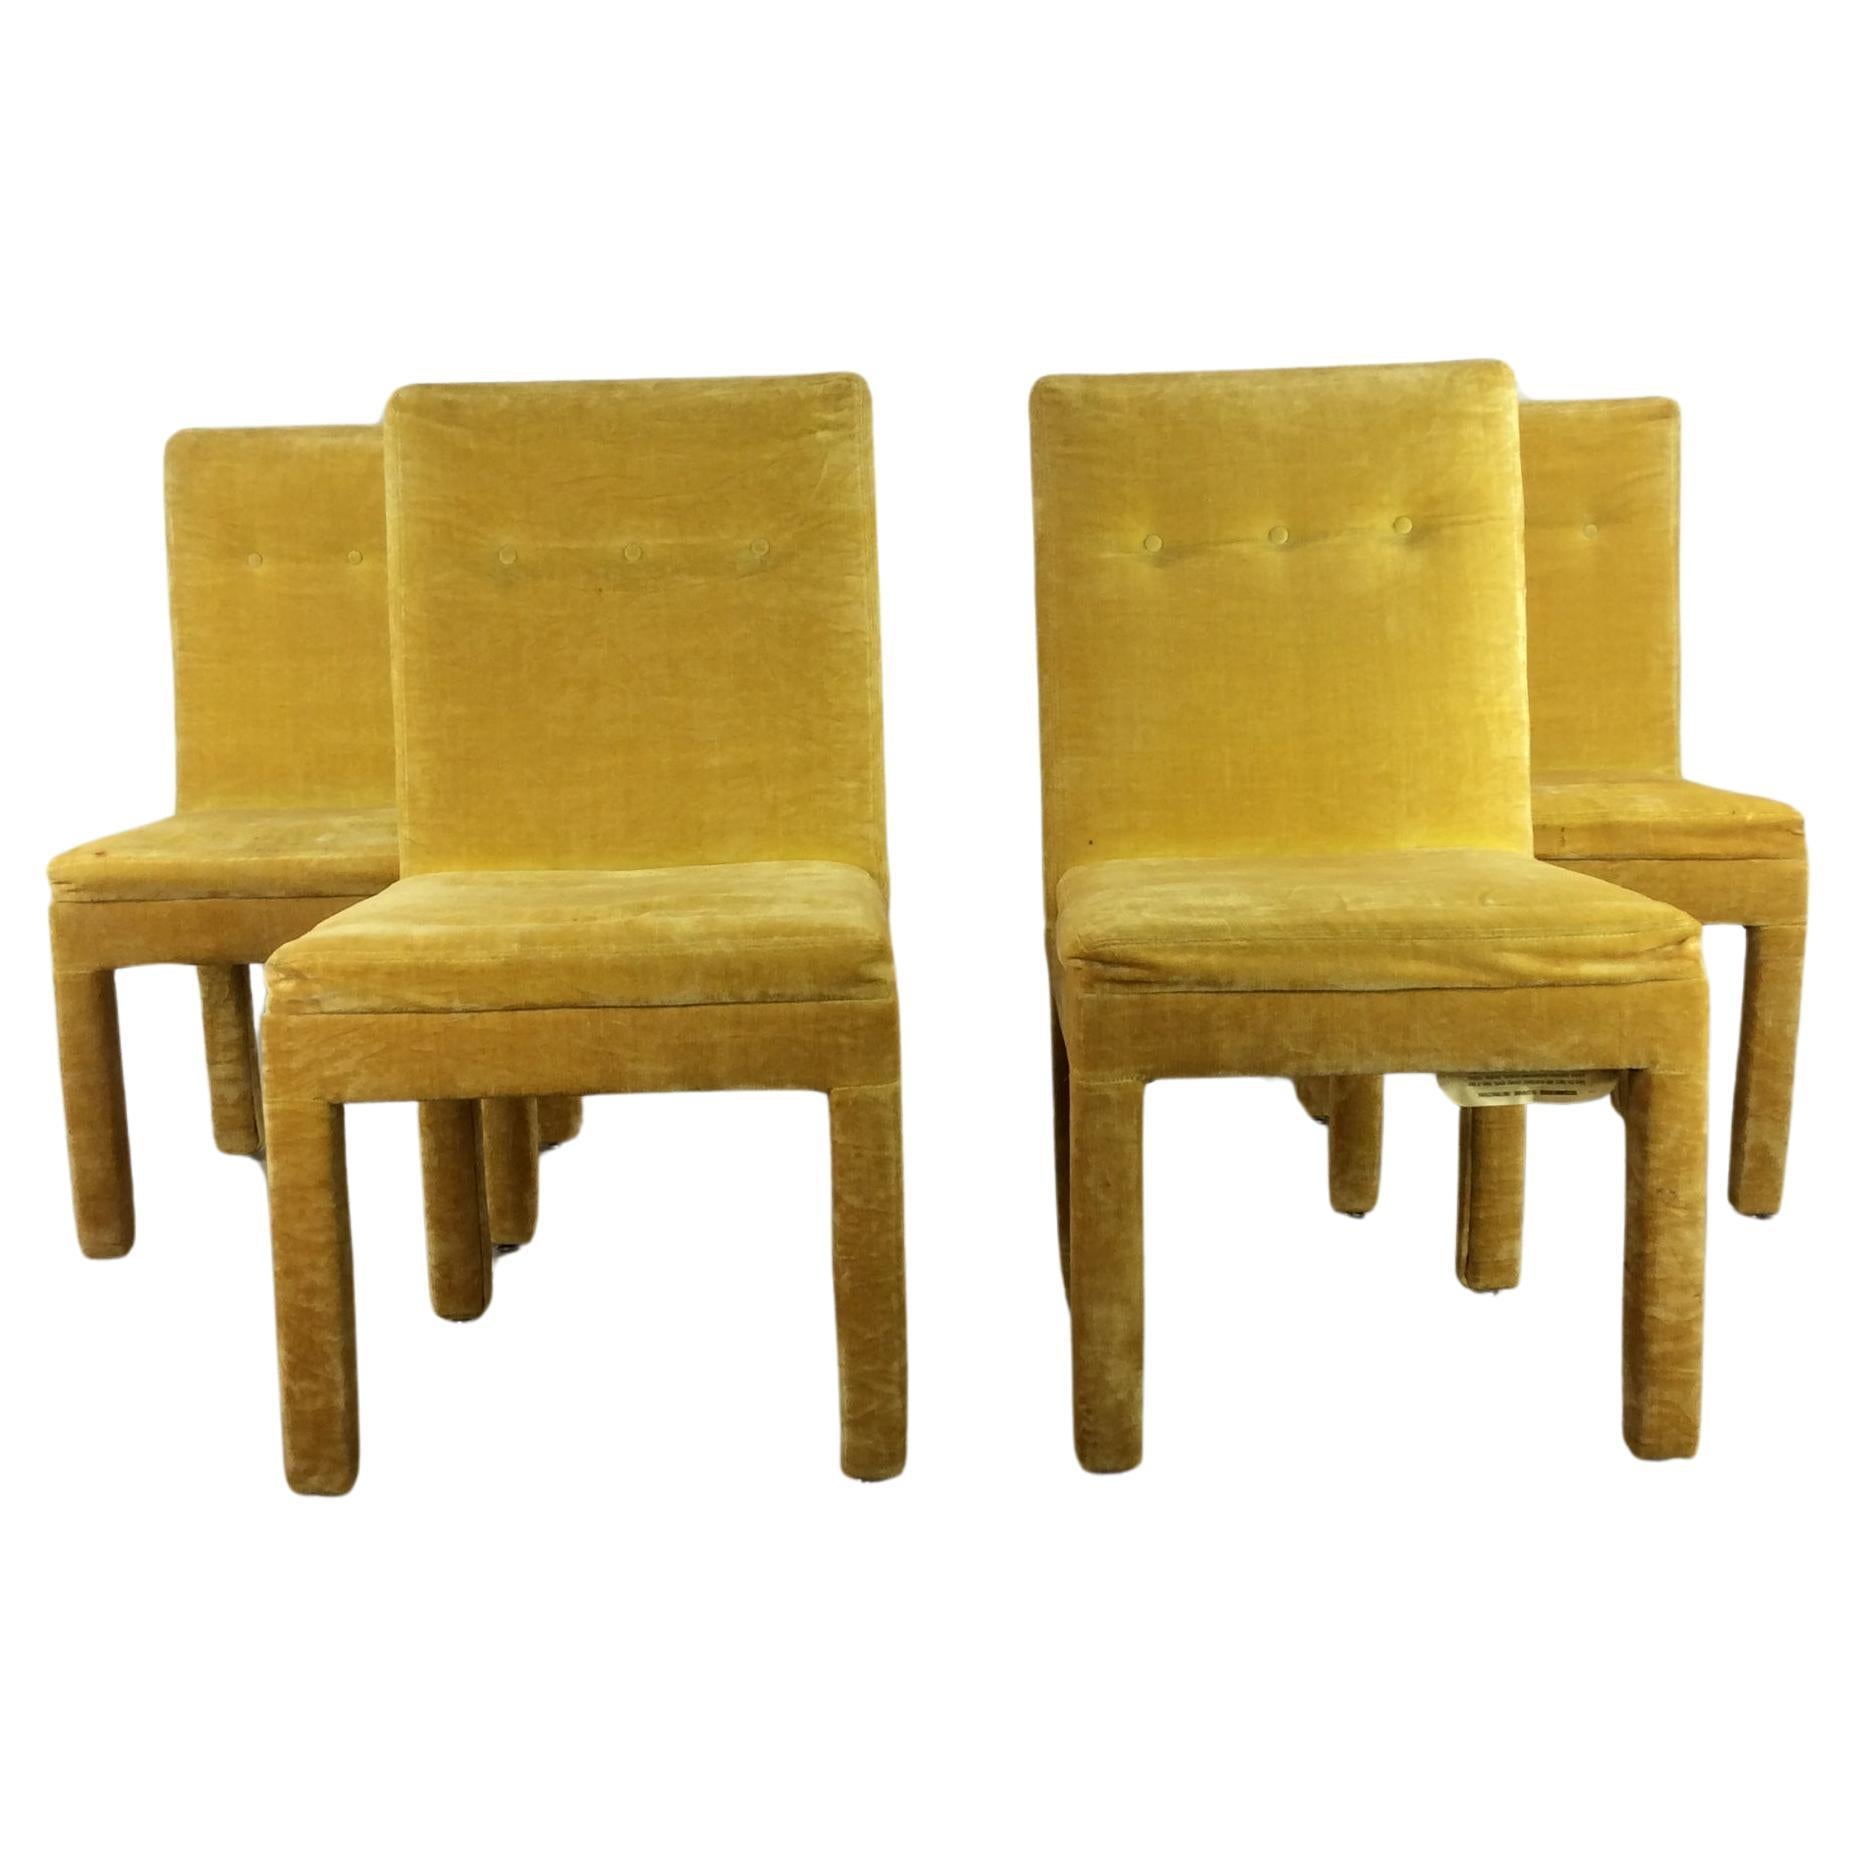 Set of 4 Postmodern Parson's Style Dining Chairs in Yellow For Sale